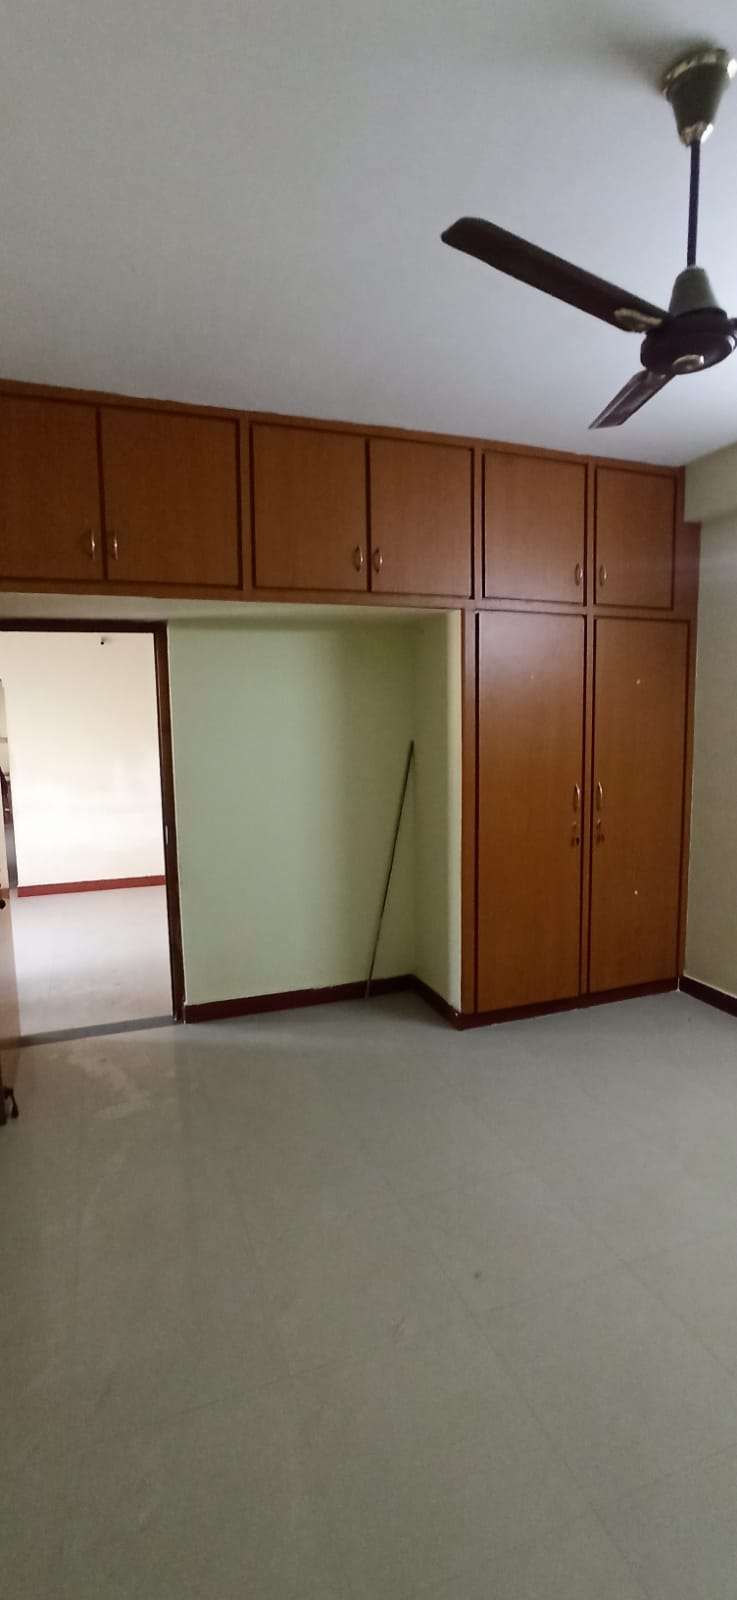 3 Bedroom 1773 Sq.Ft. Apartment in Trichy Madurai Road Trichy